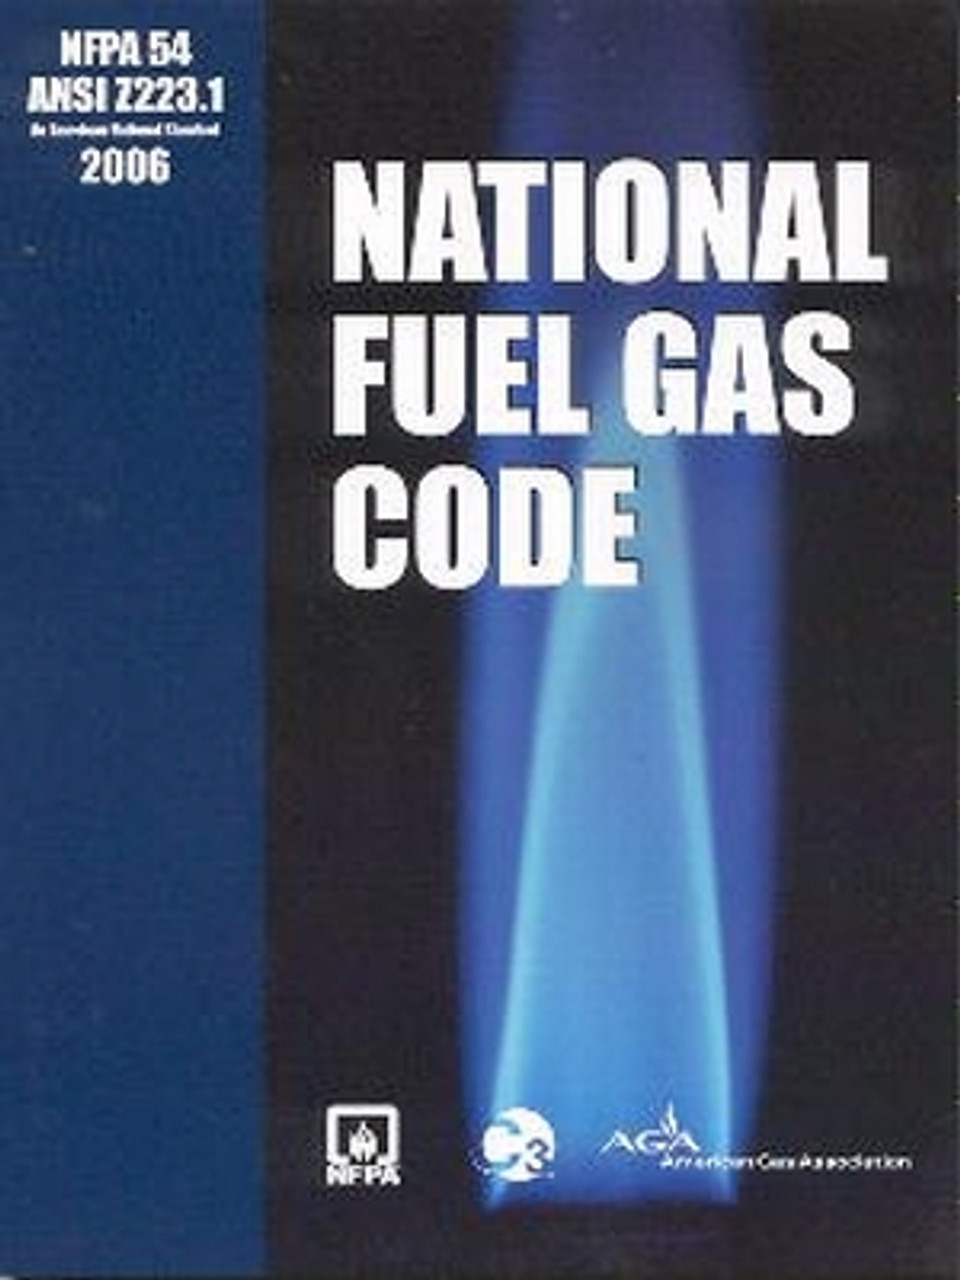 nfpa-54-national-fuel-gas-code-2006-psi-online-store